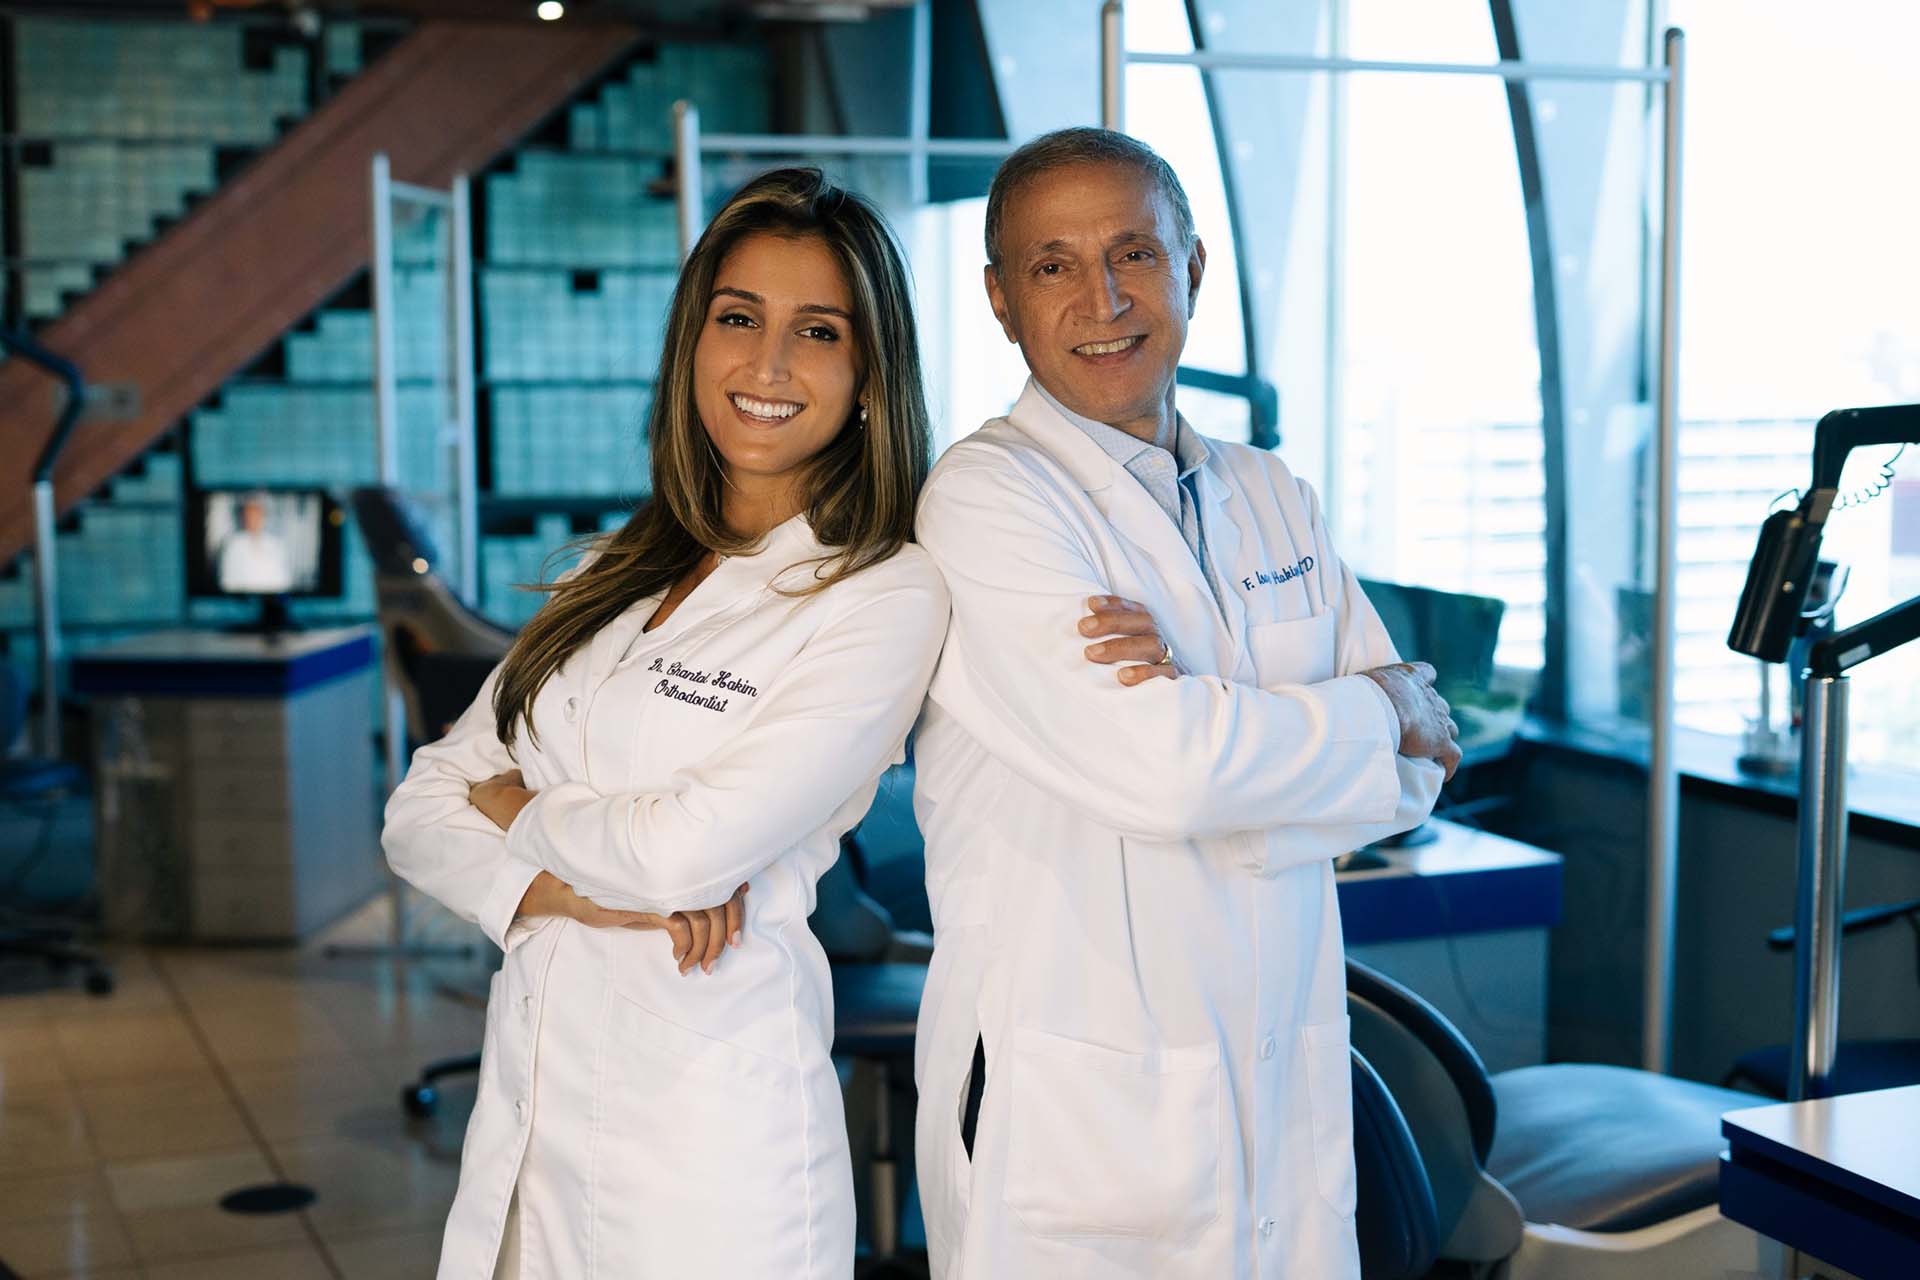 Dr. Chantal Hakim and Dr. F. Isaac Hakim at the Orthospaceship in Los Angeles, a Southern California orthodontic practice serving Holmby Hills, Los Angeles.